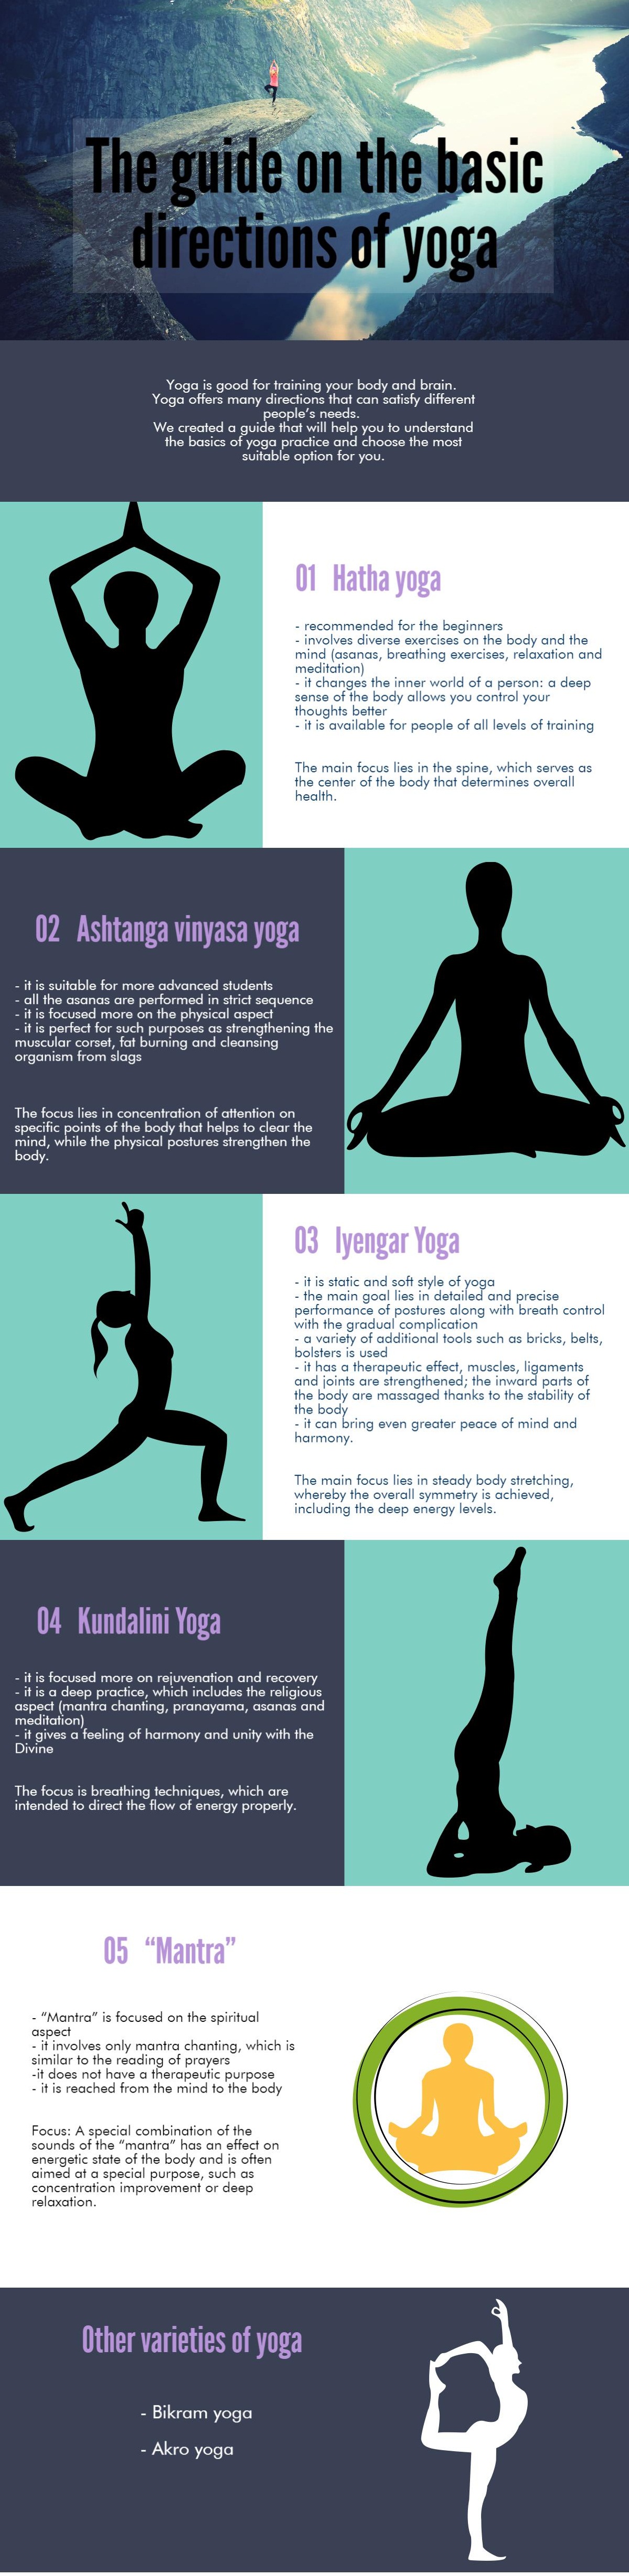 The guide on the basic directions of yoga